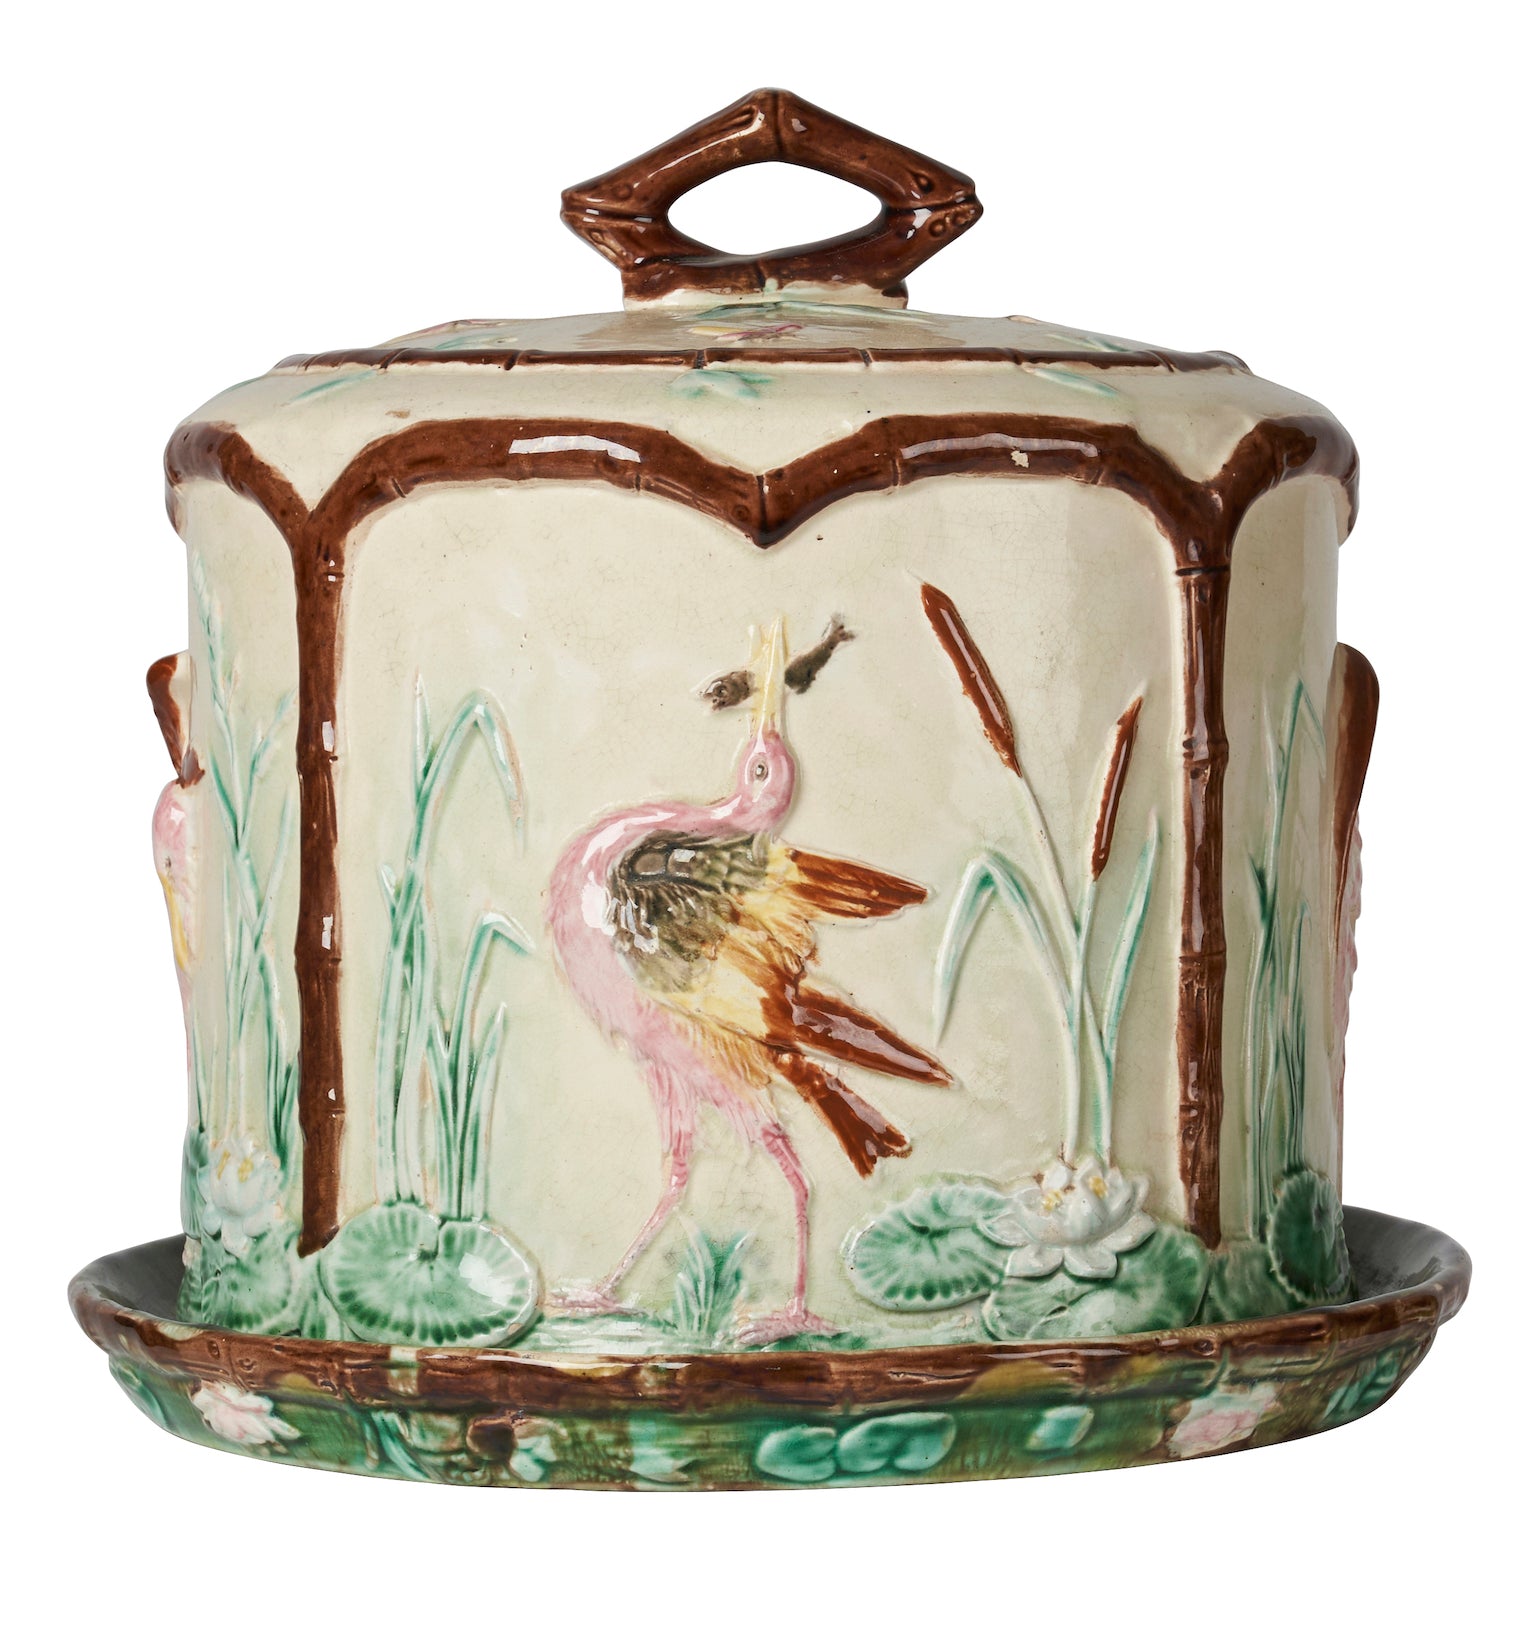 SOLD A rare and impressive Majolica cheese plate and domed cover, English 19th Century